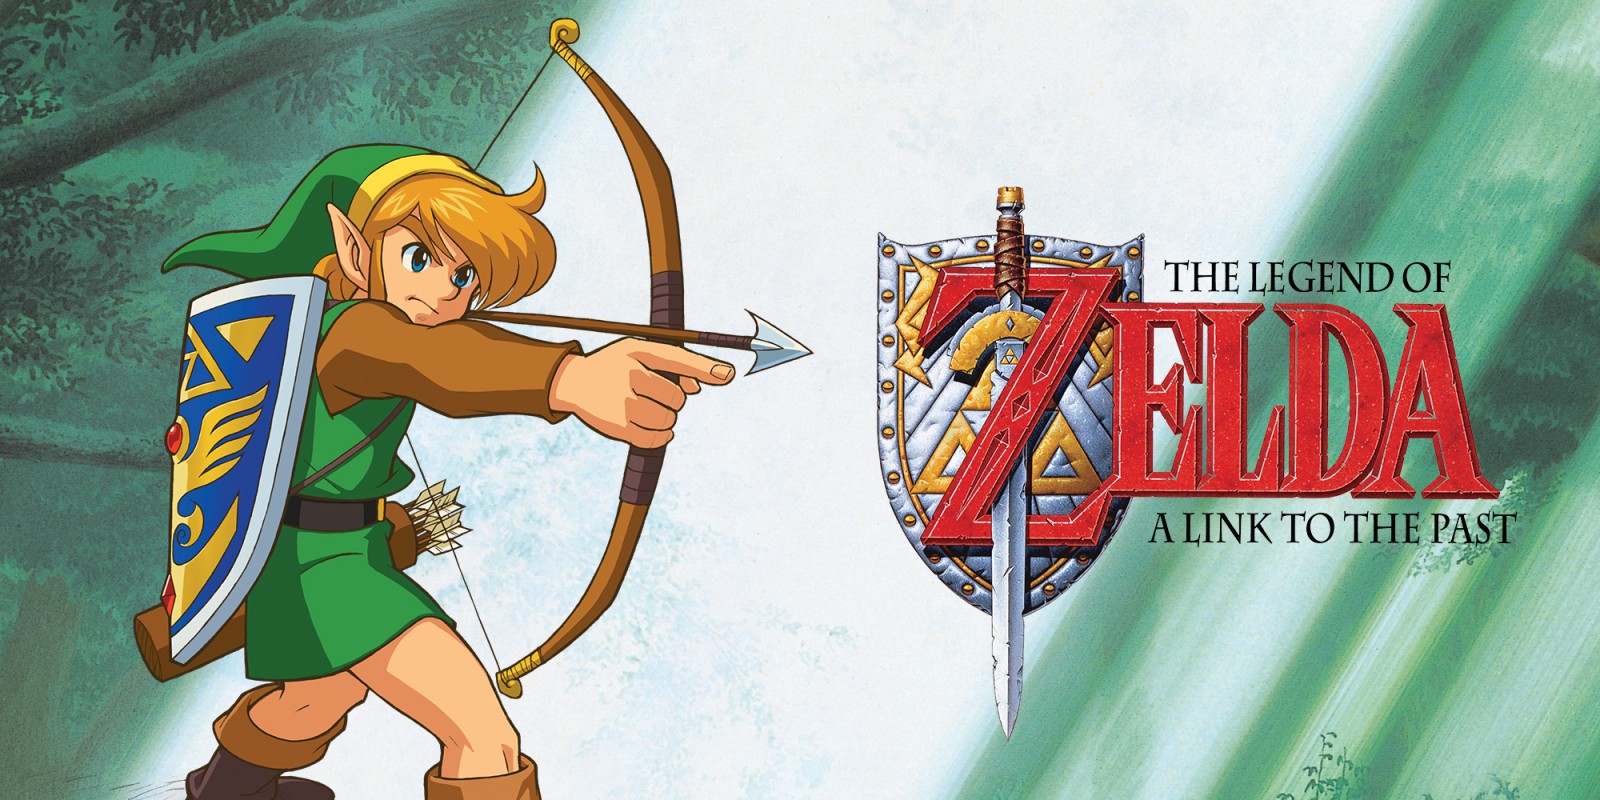 The Legend of zelda: A Link to the Past 2020